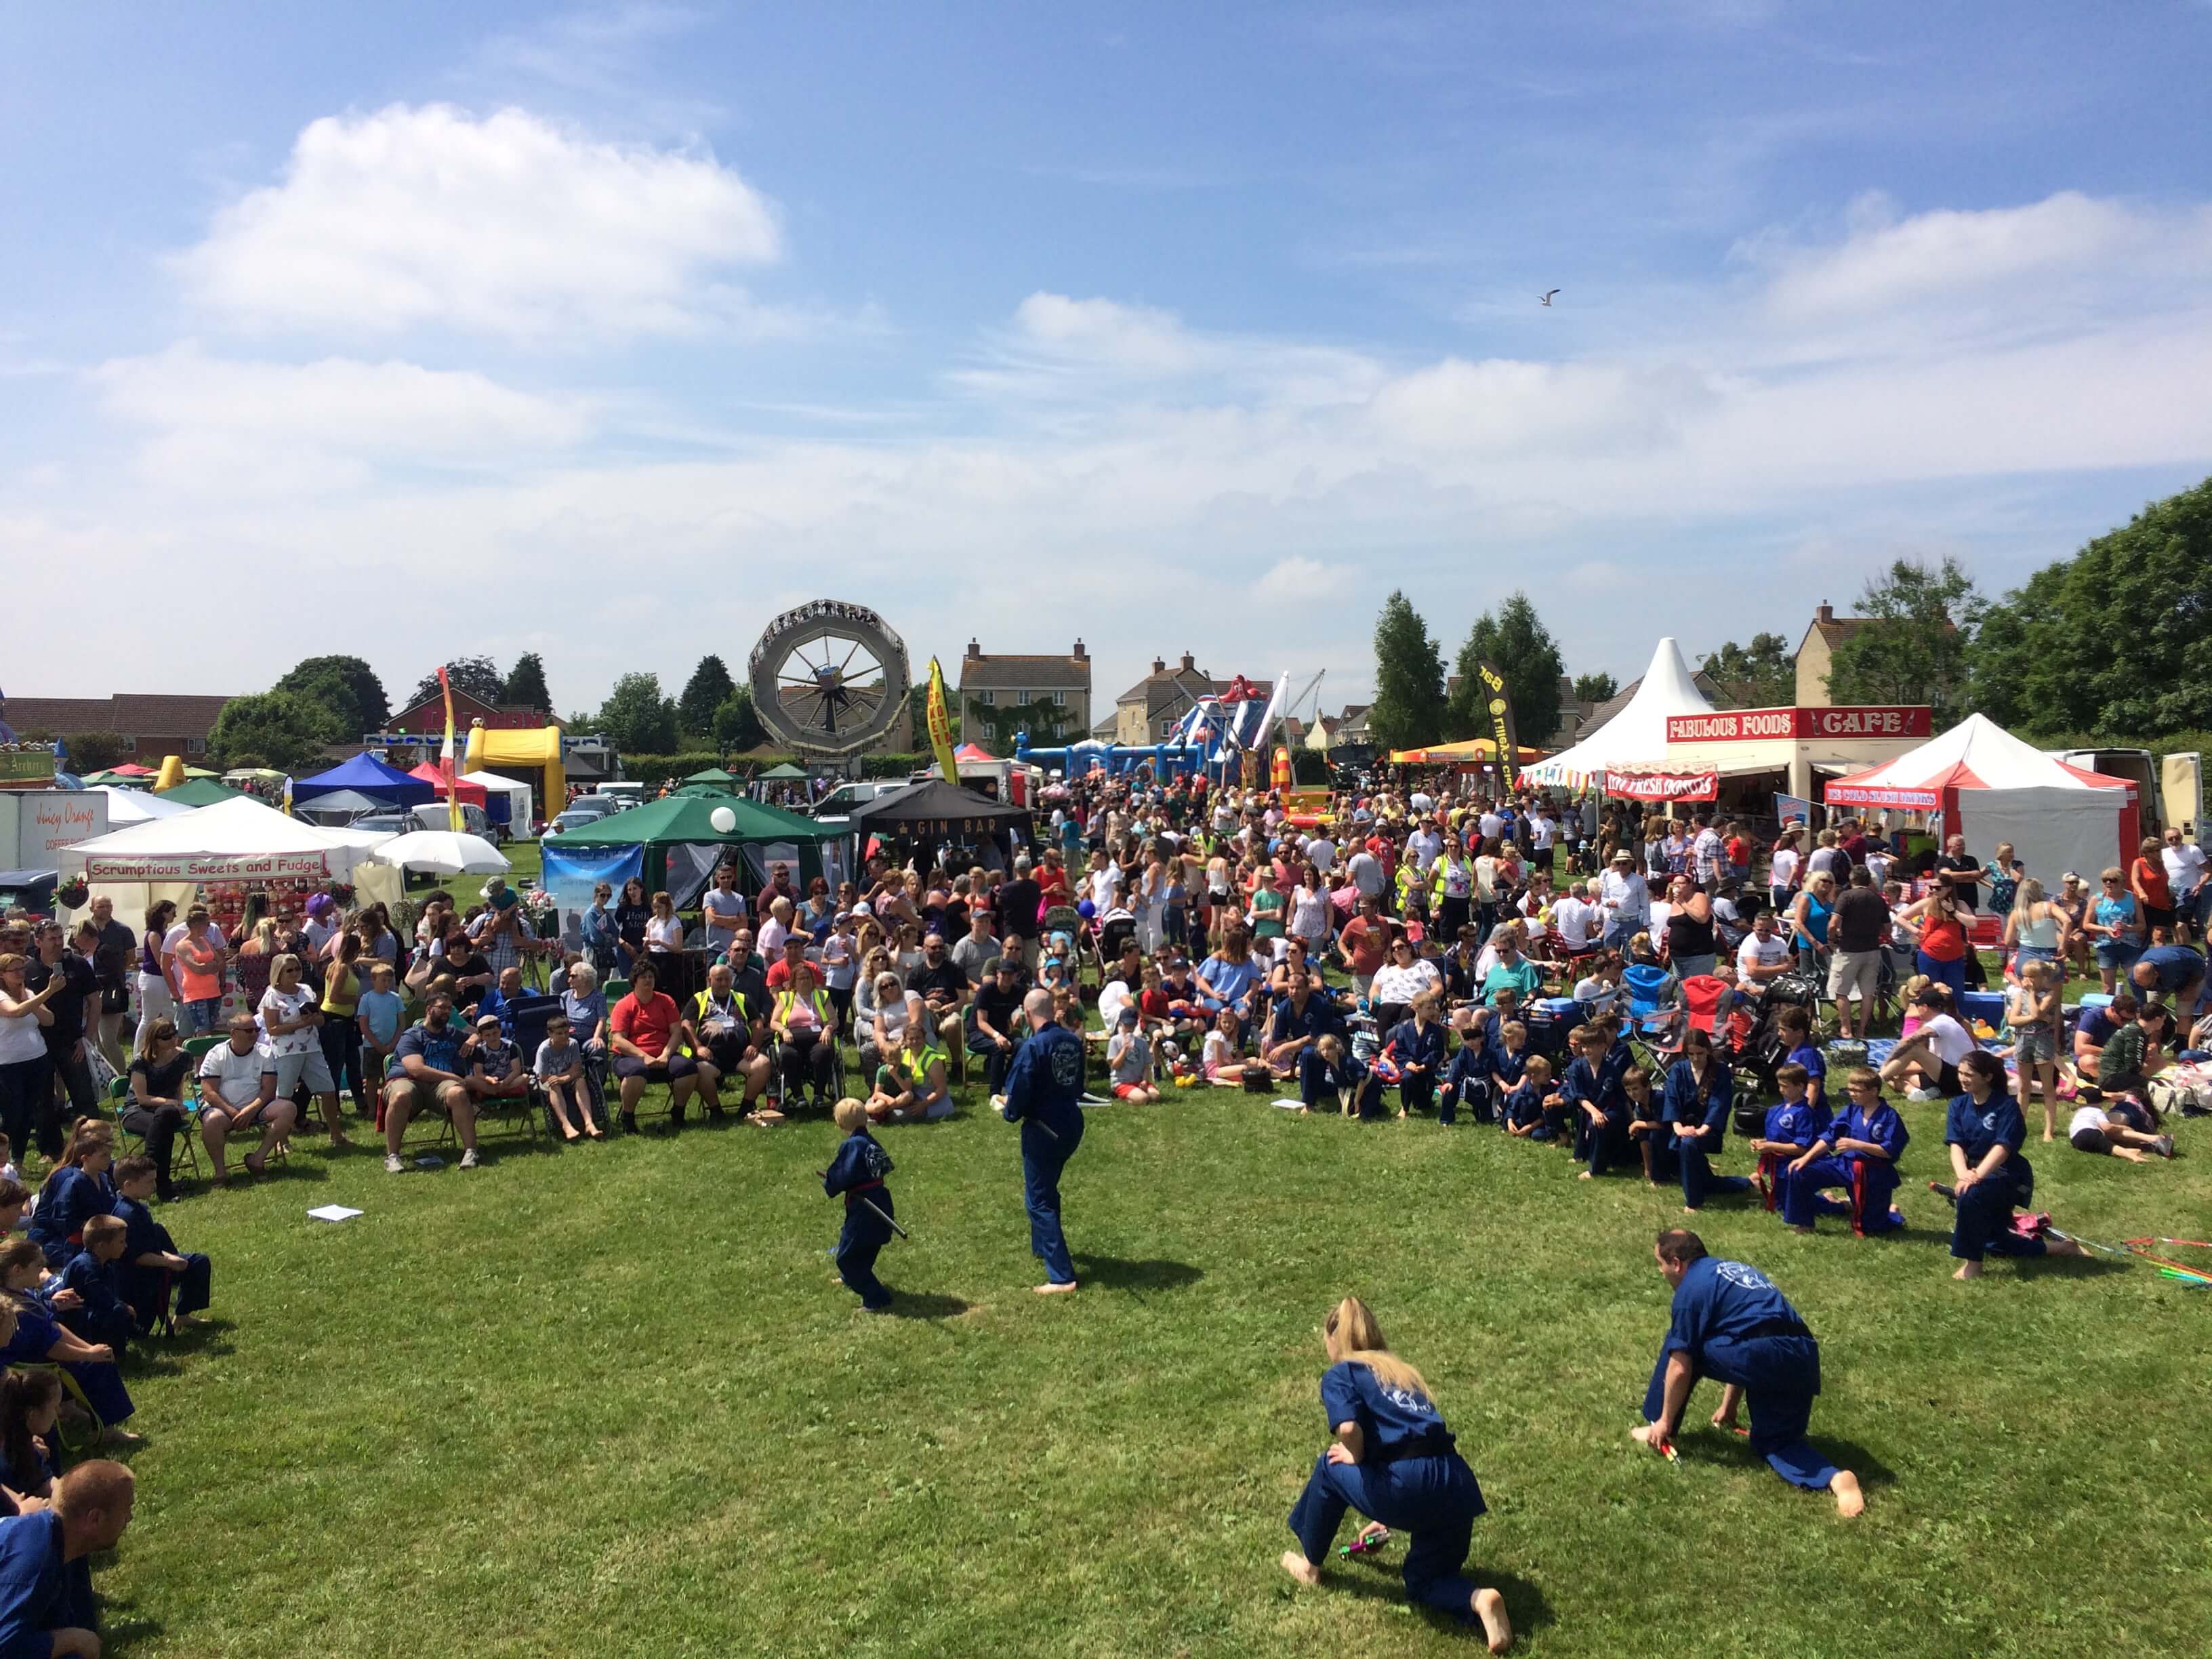 Almost 3,000 people turn out for Peasedown’s 10th Annual Party in the Park Festival